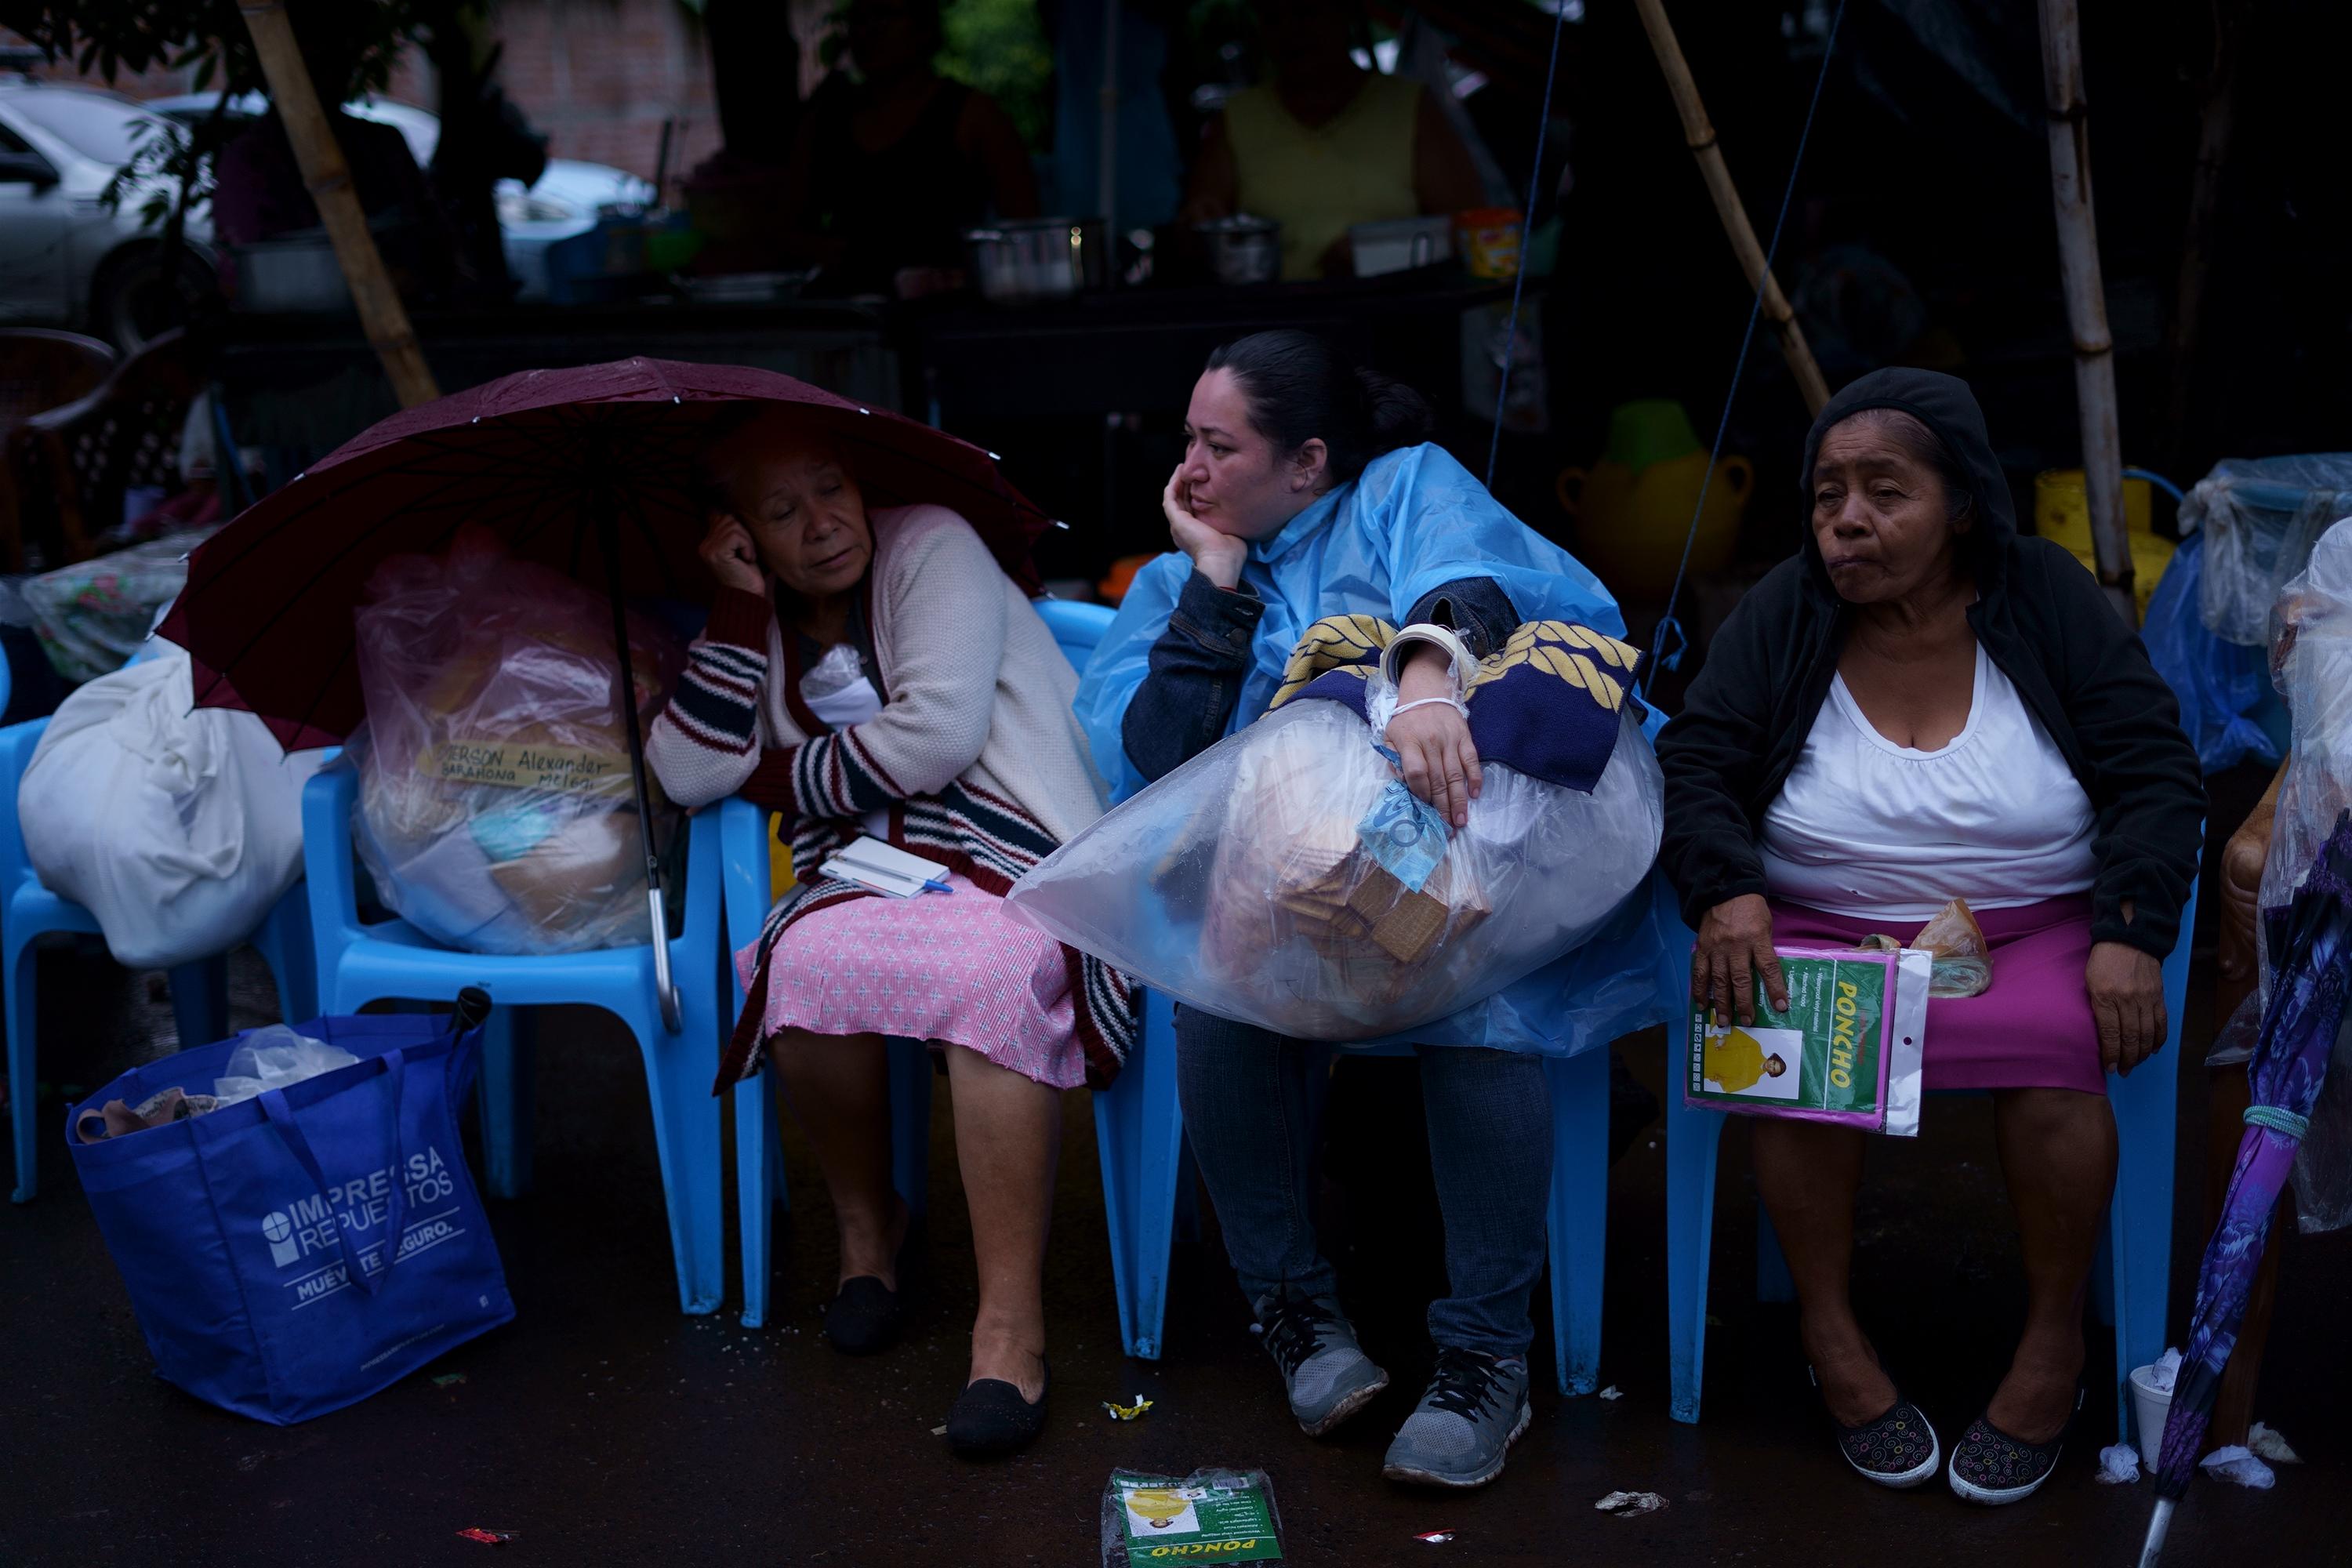 Family members, most of them women, began arriving at the Izalco Prison around 2 a.m., to be the first in line to deliver their packages of food and clothing. Waiting, too, costs money: every day, residents of the community near the prison set up chairs and rent them for one dollar per person. Some have been waiting for six hours while others spent the night here, waiting until 7:30 a..m., when the prison begins authorizing deliveries.